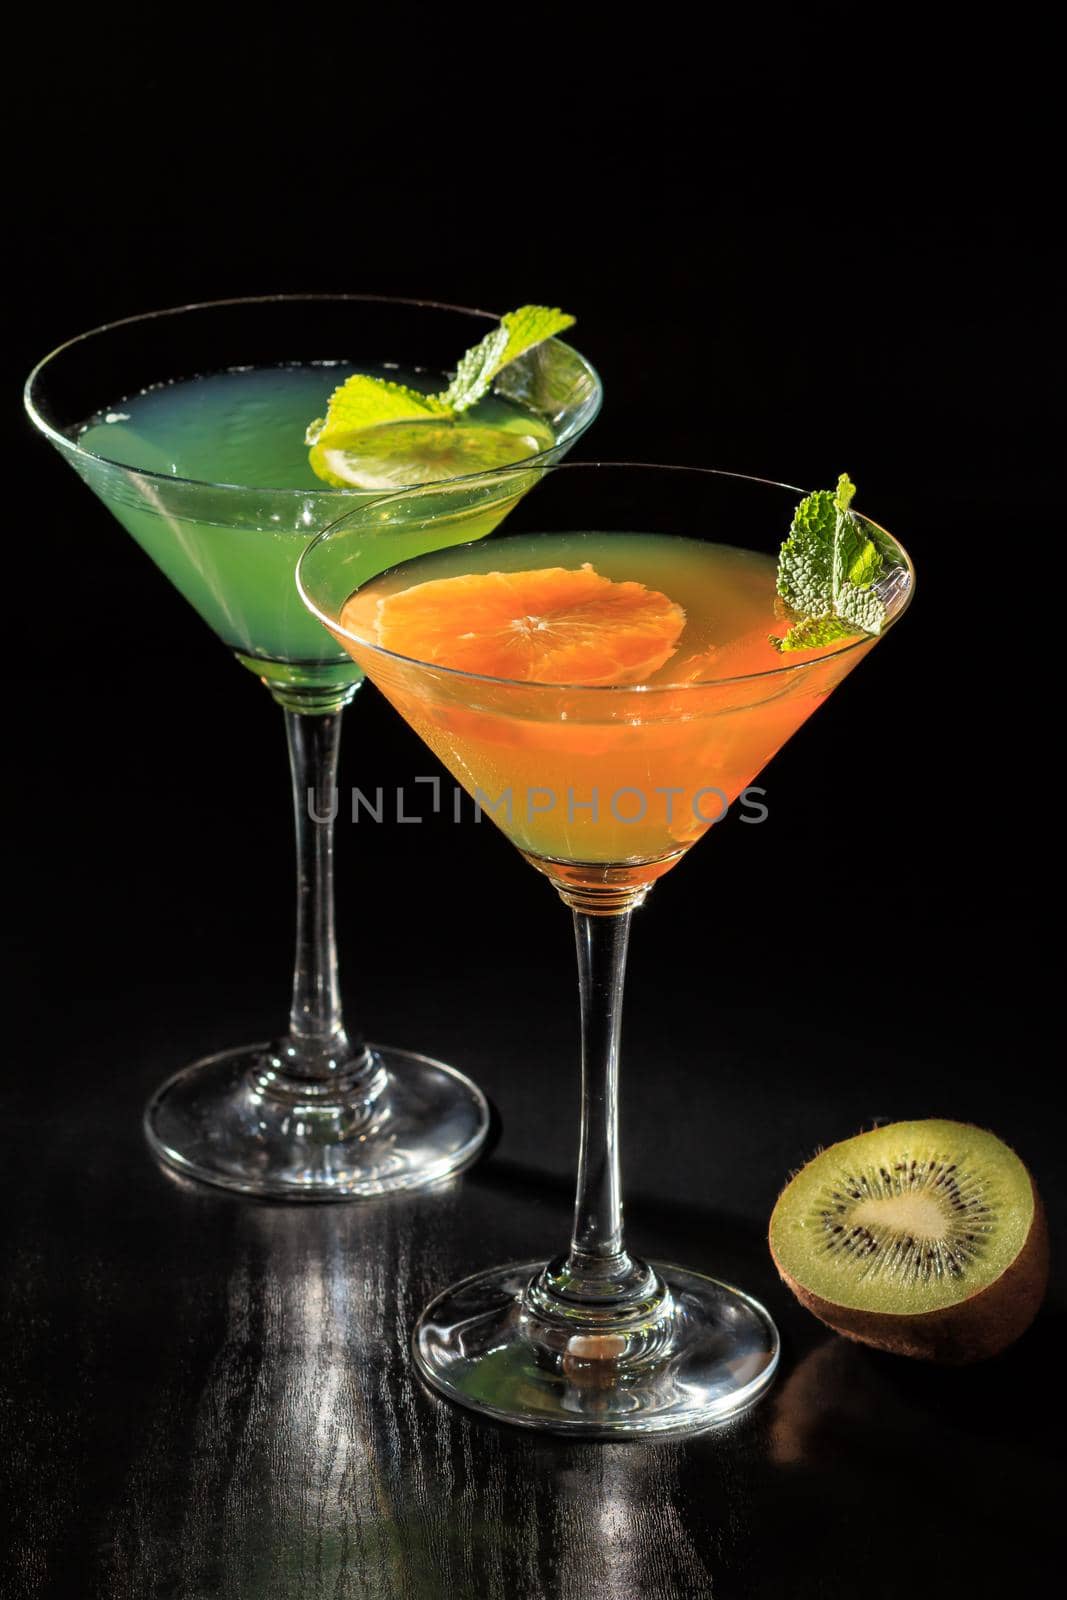 Kiwi and orange jelly with lime pieces in the glasses topped mint leaves on the black background